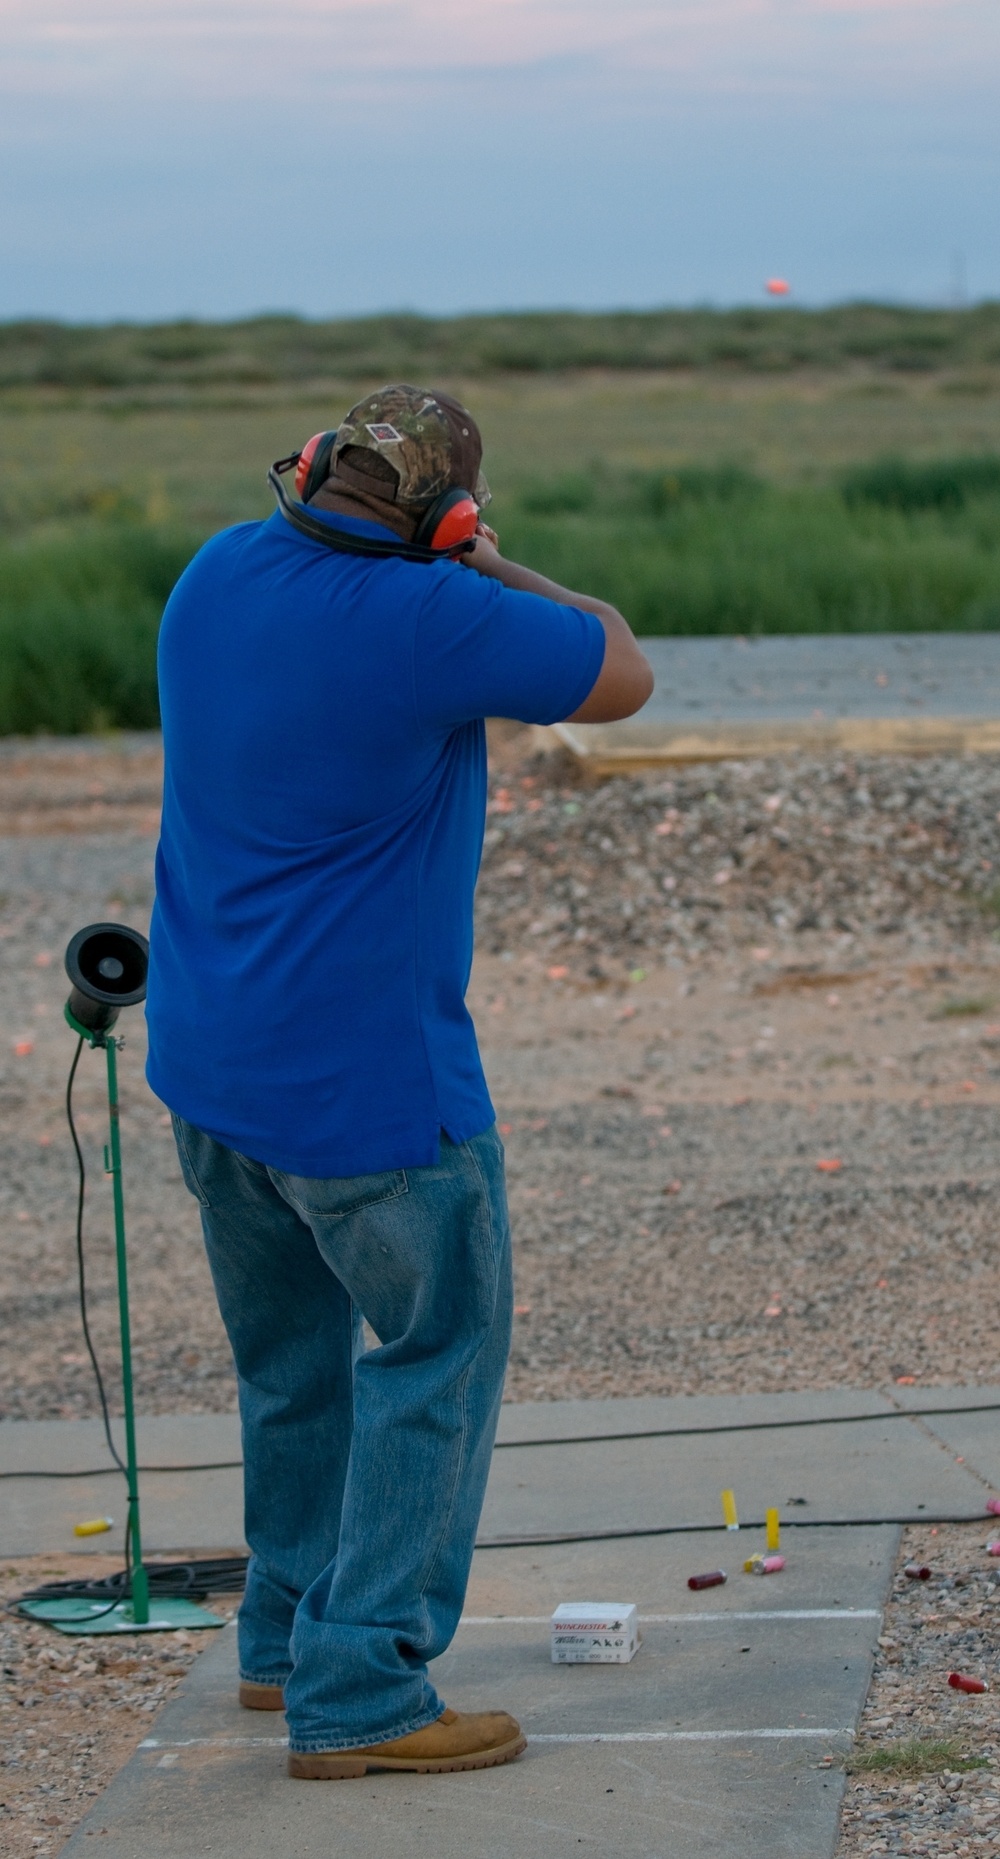 Bliss teams vie for trap and skeet championship